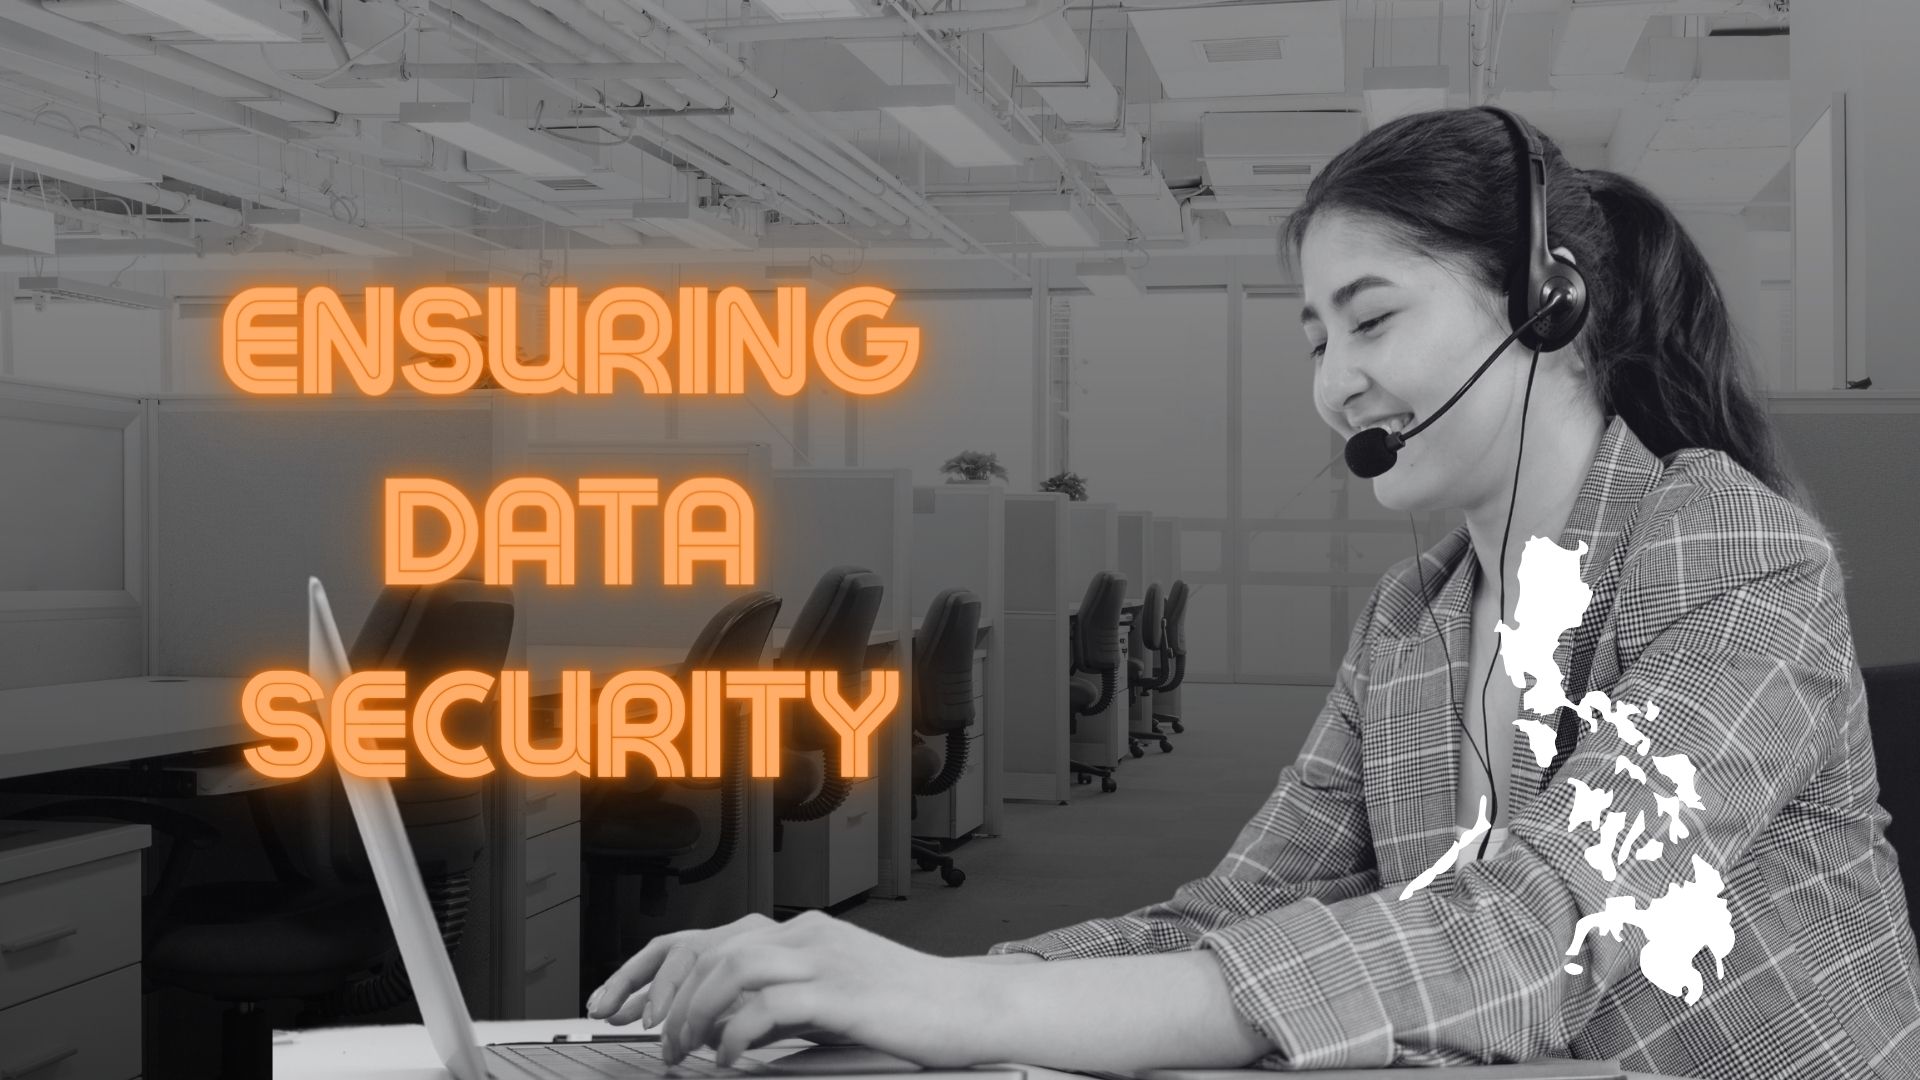 Somebody2Hire: Ensuring Data Security at Our Philippines Call Center